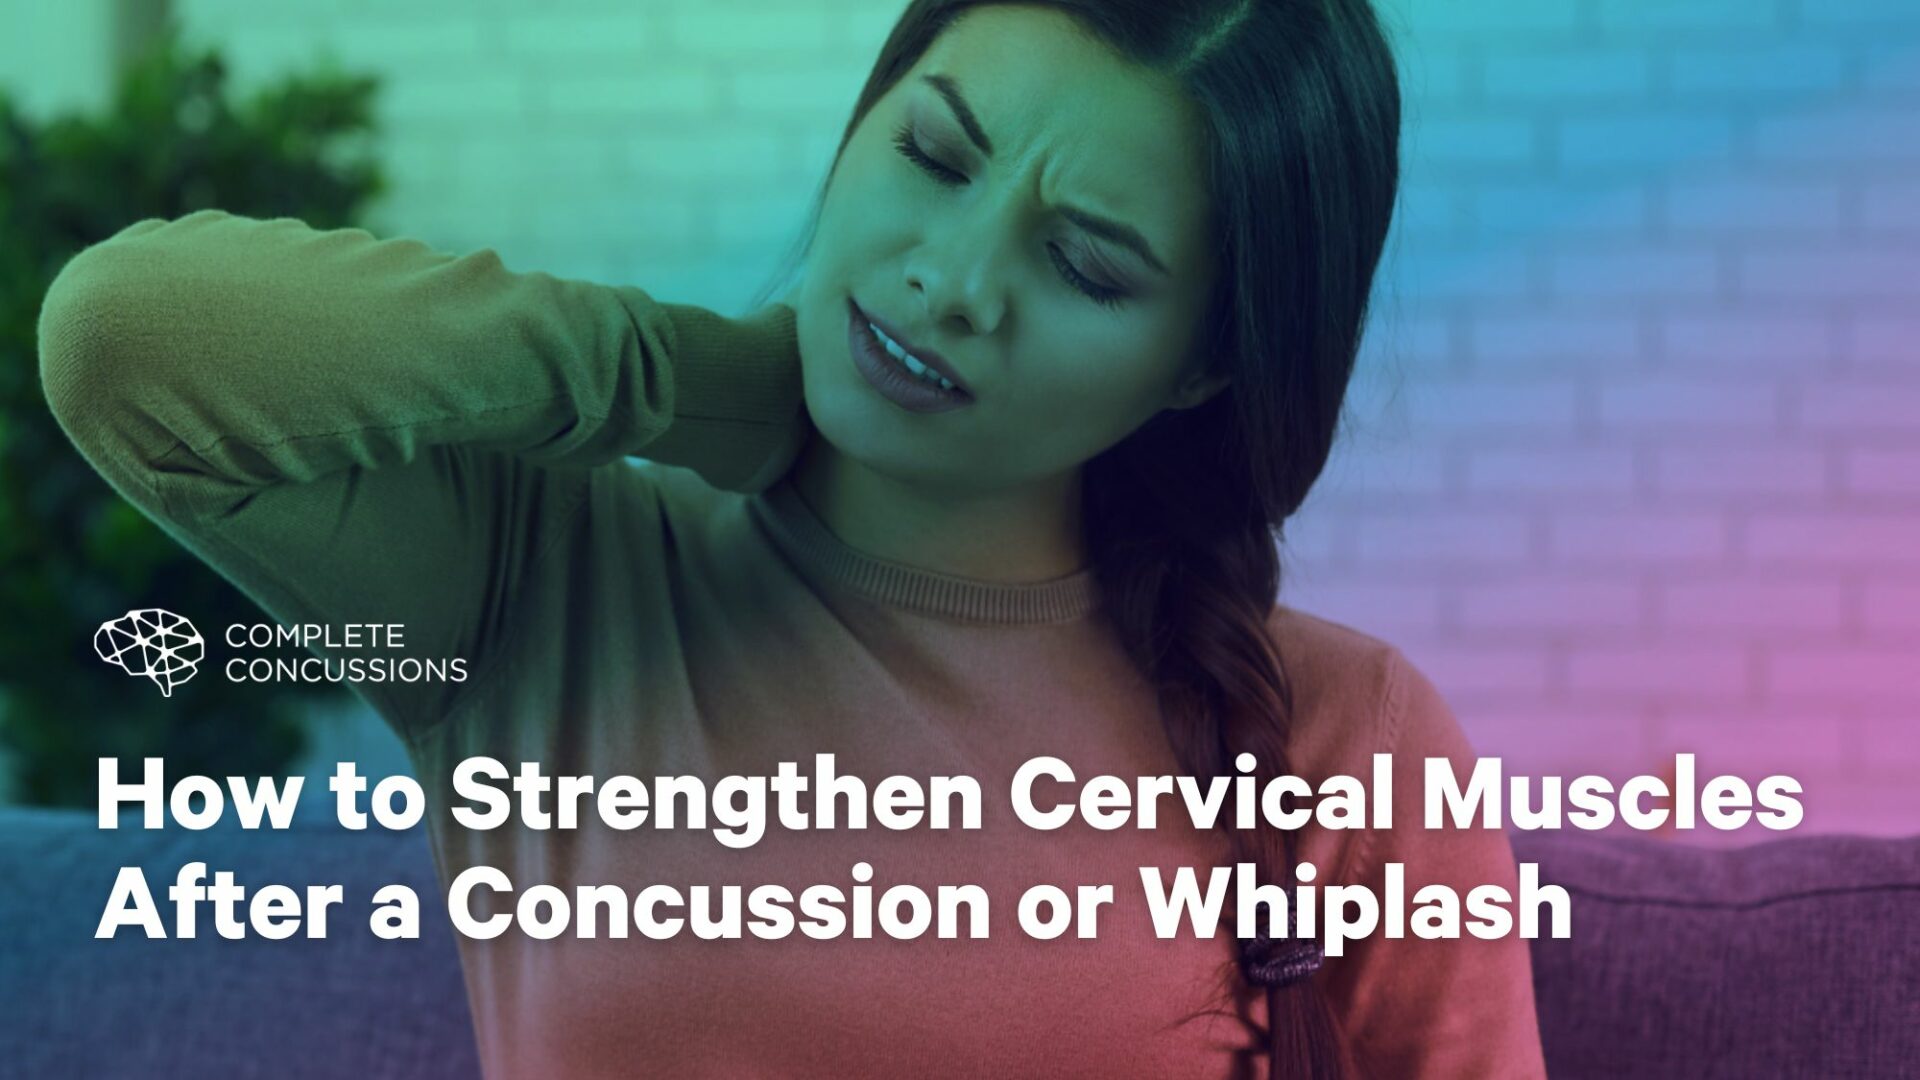 How to Strengthen Cervical Muscles After a Concussion or Whiplash